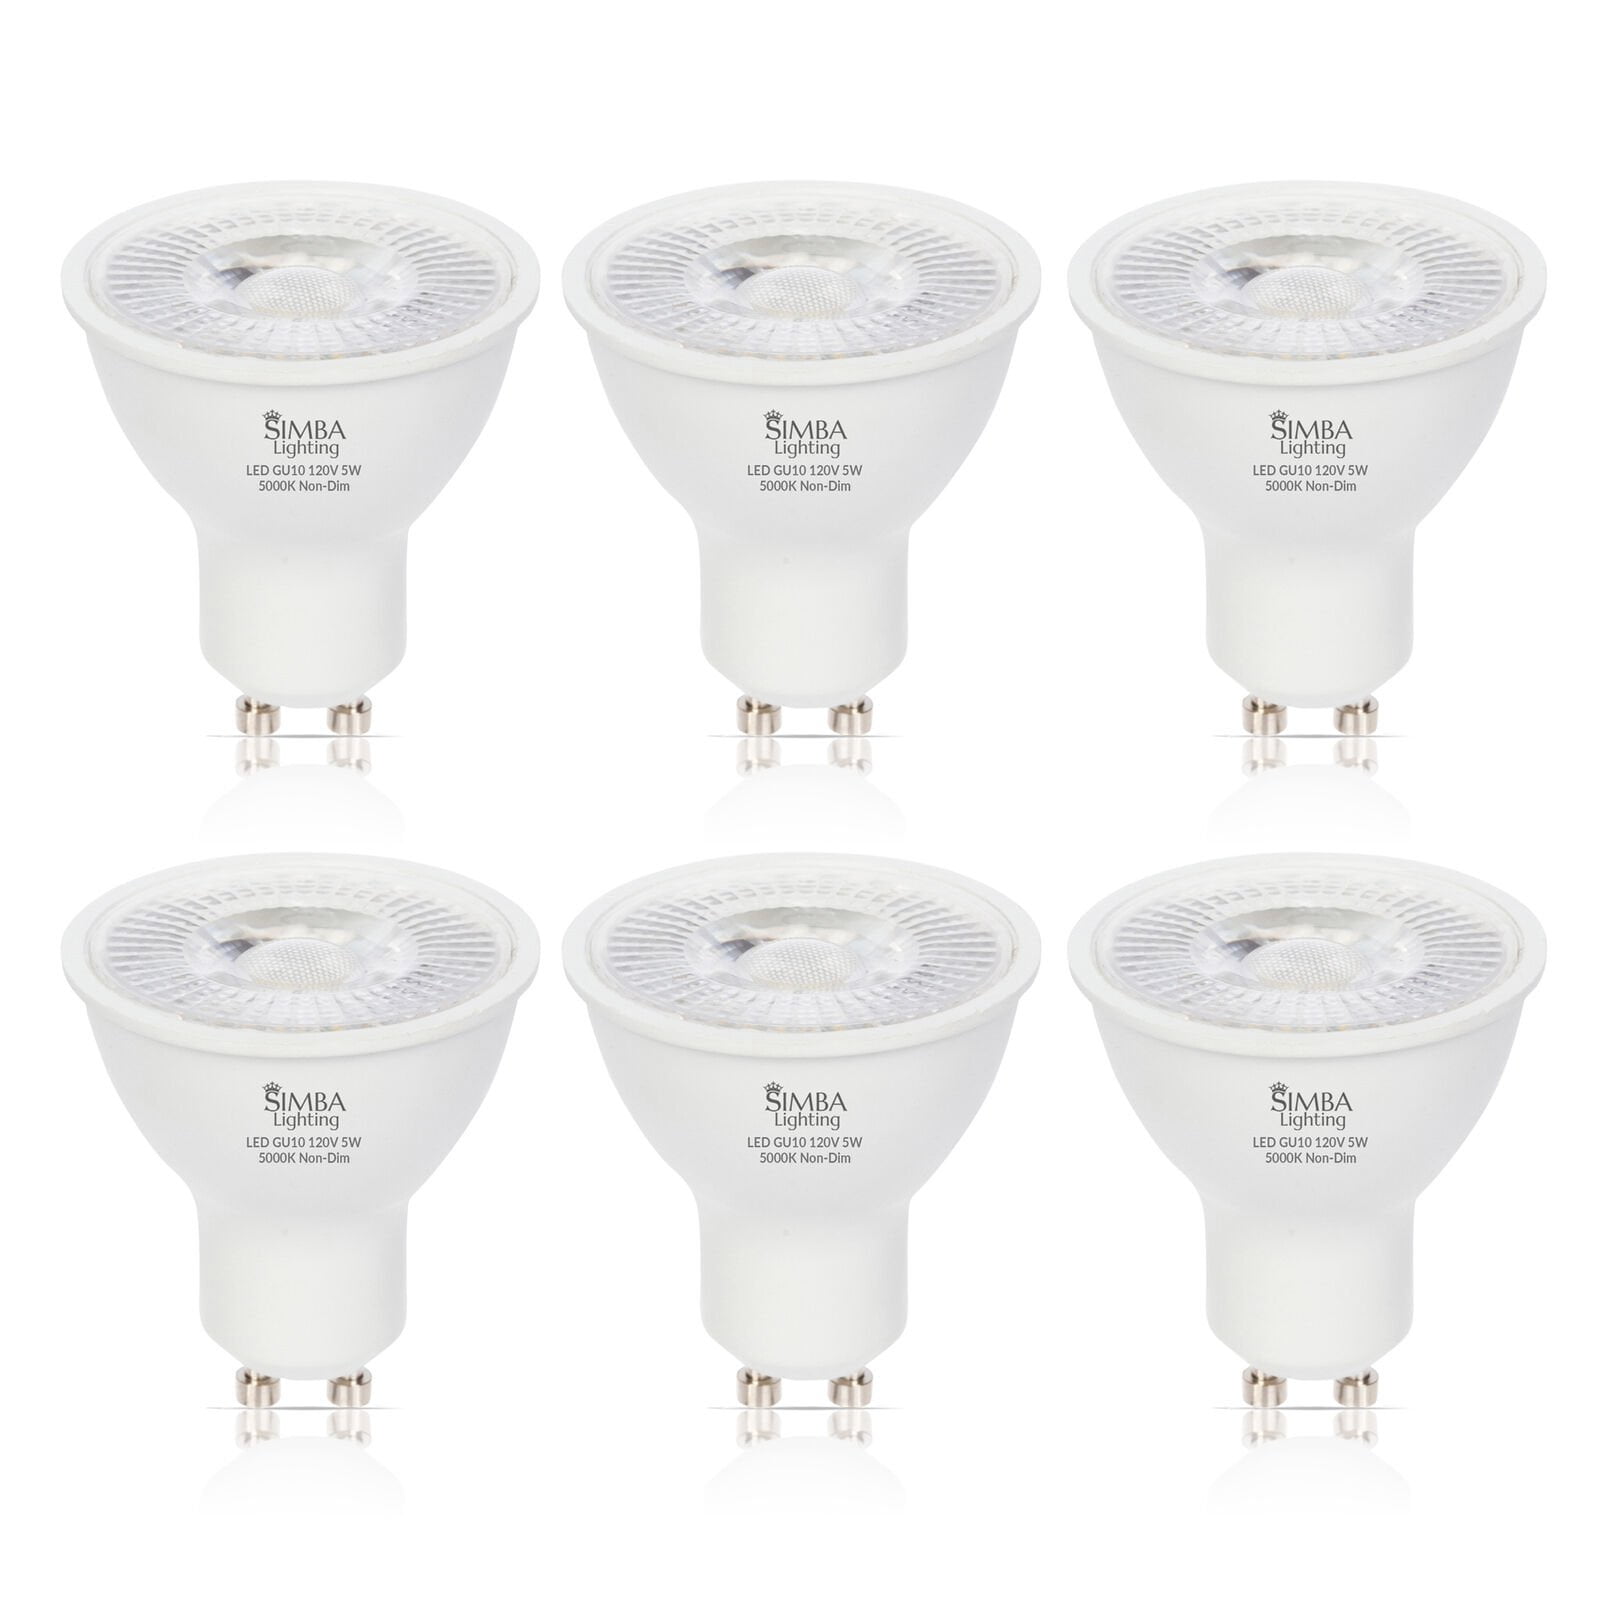 50w Halogen Replacement LED 5w GU10 Bulbs Warm White,Cool White or 5,10,20 or 50 